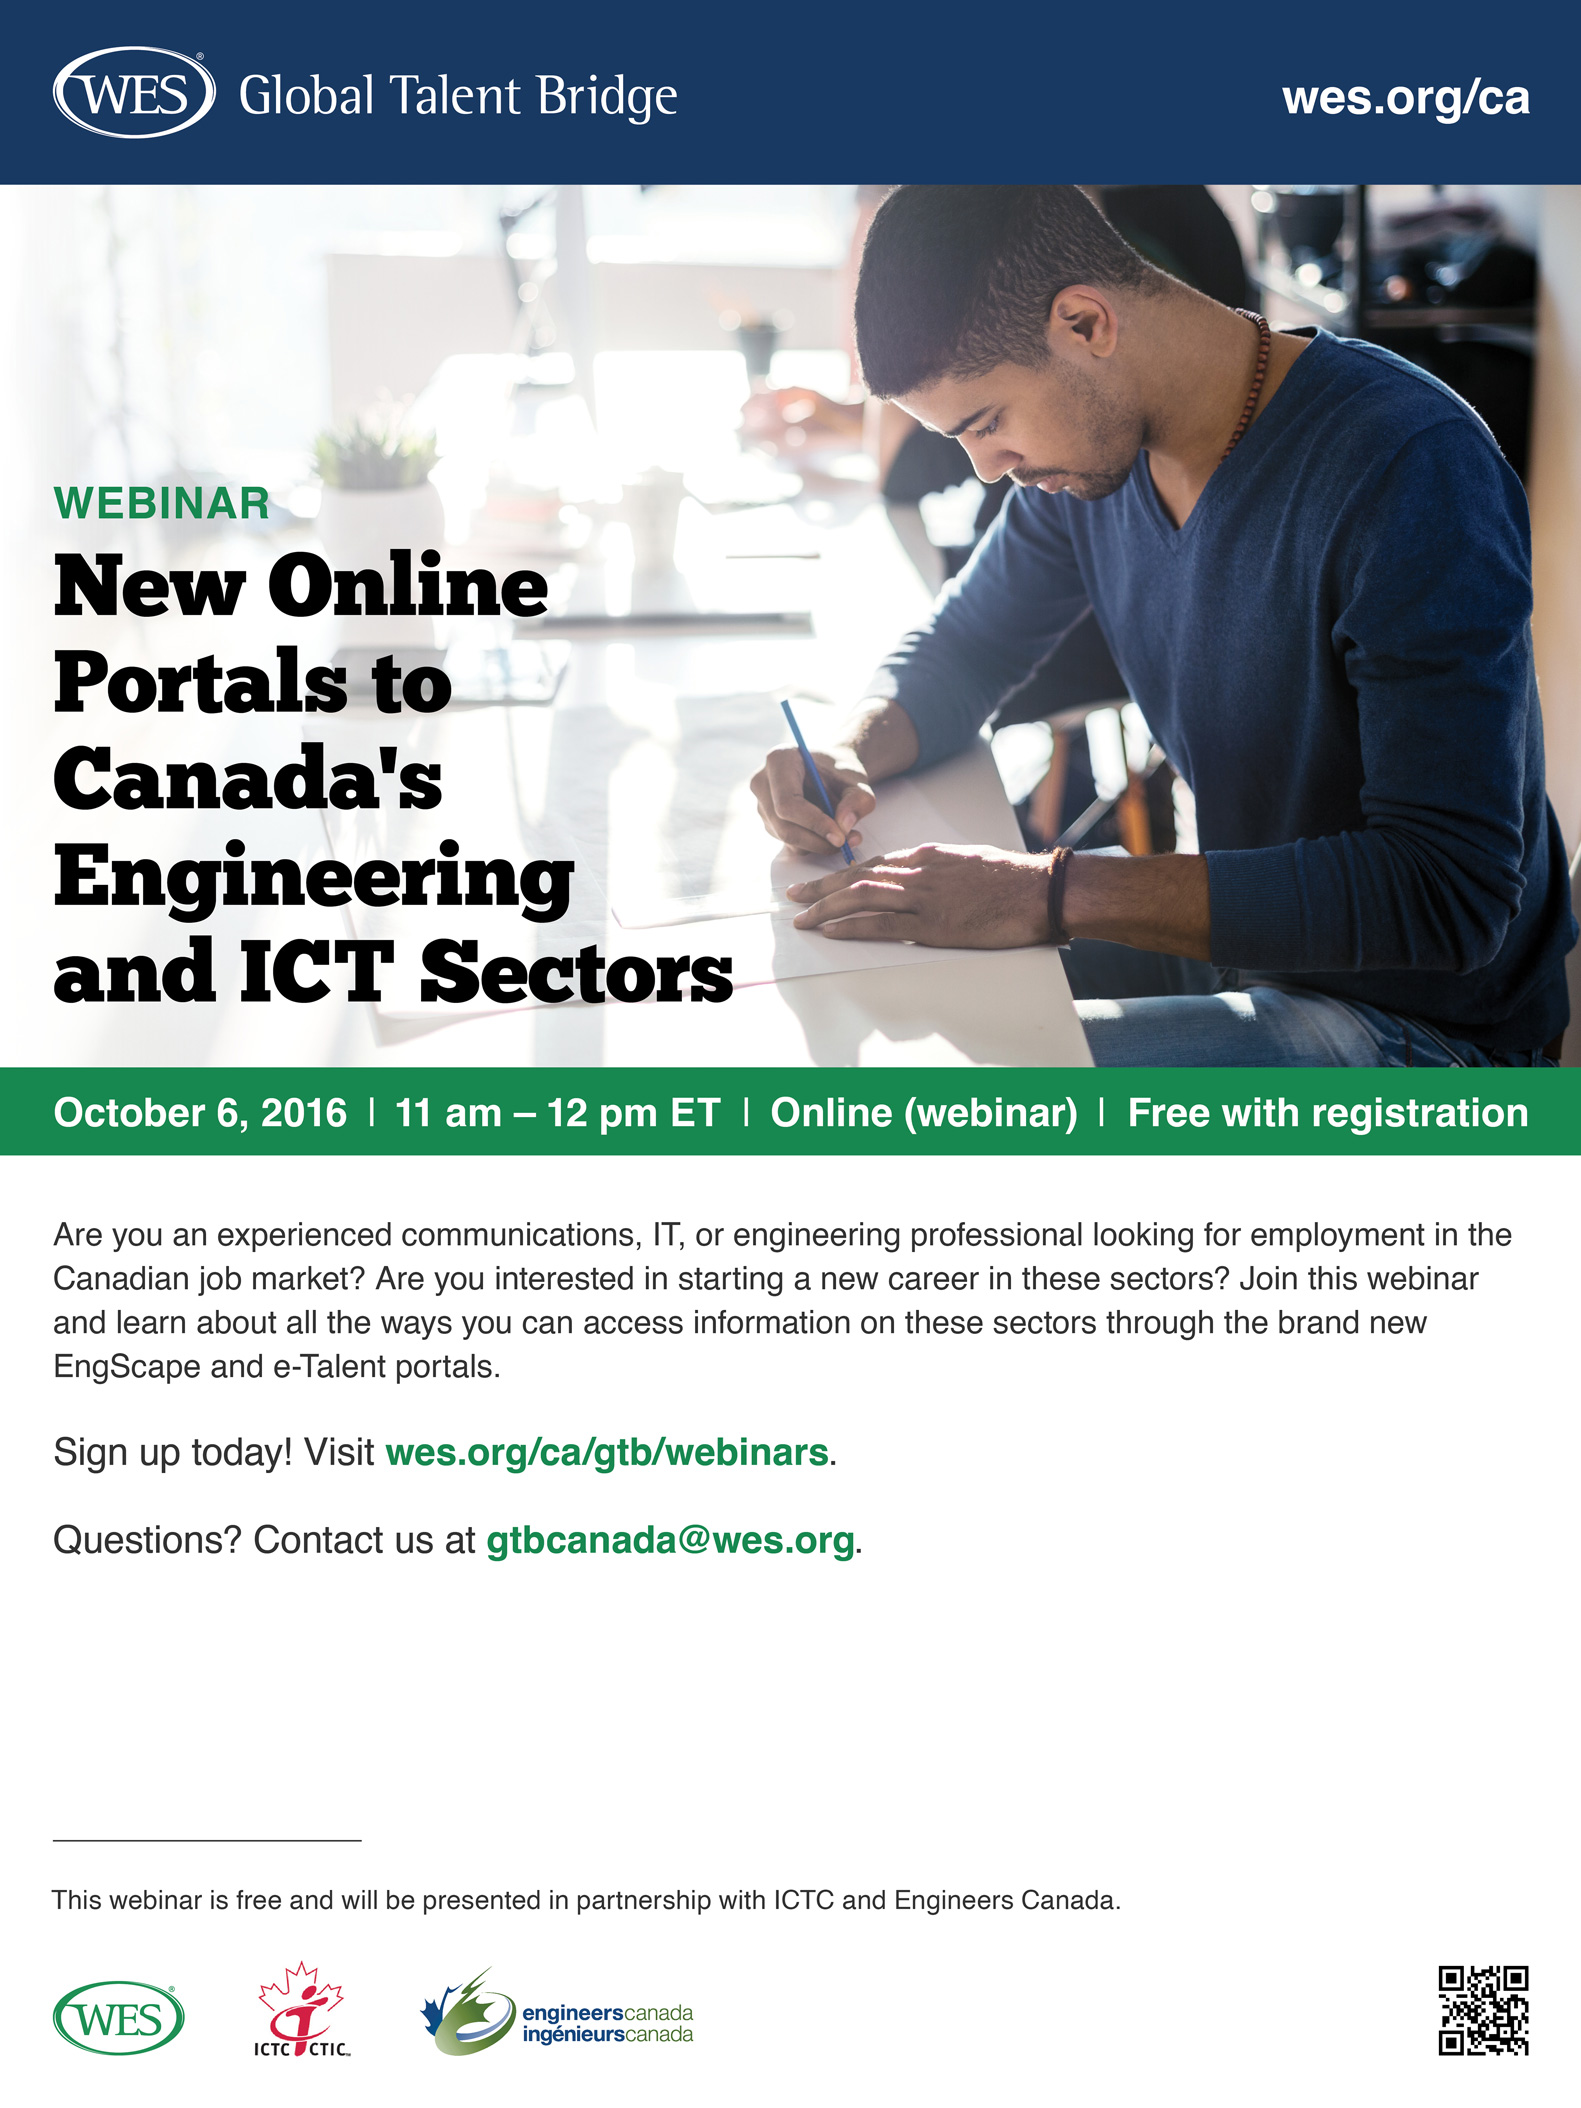 Flyer promoting a webinar on the topic of online career search for professionals in engineering, IT, and communications.